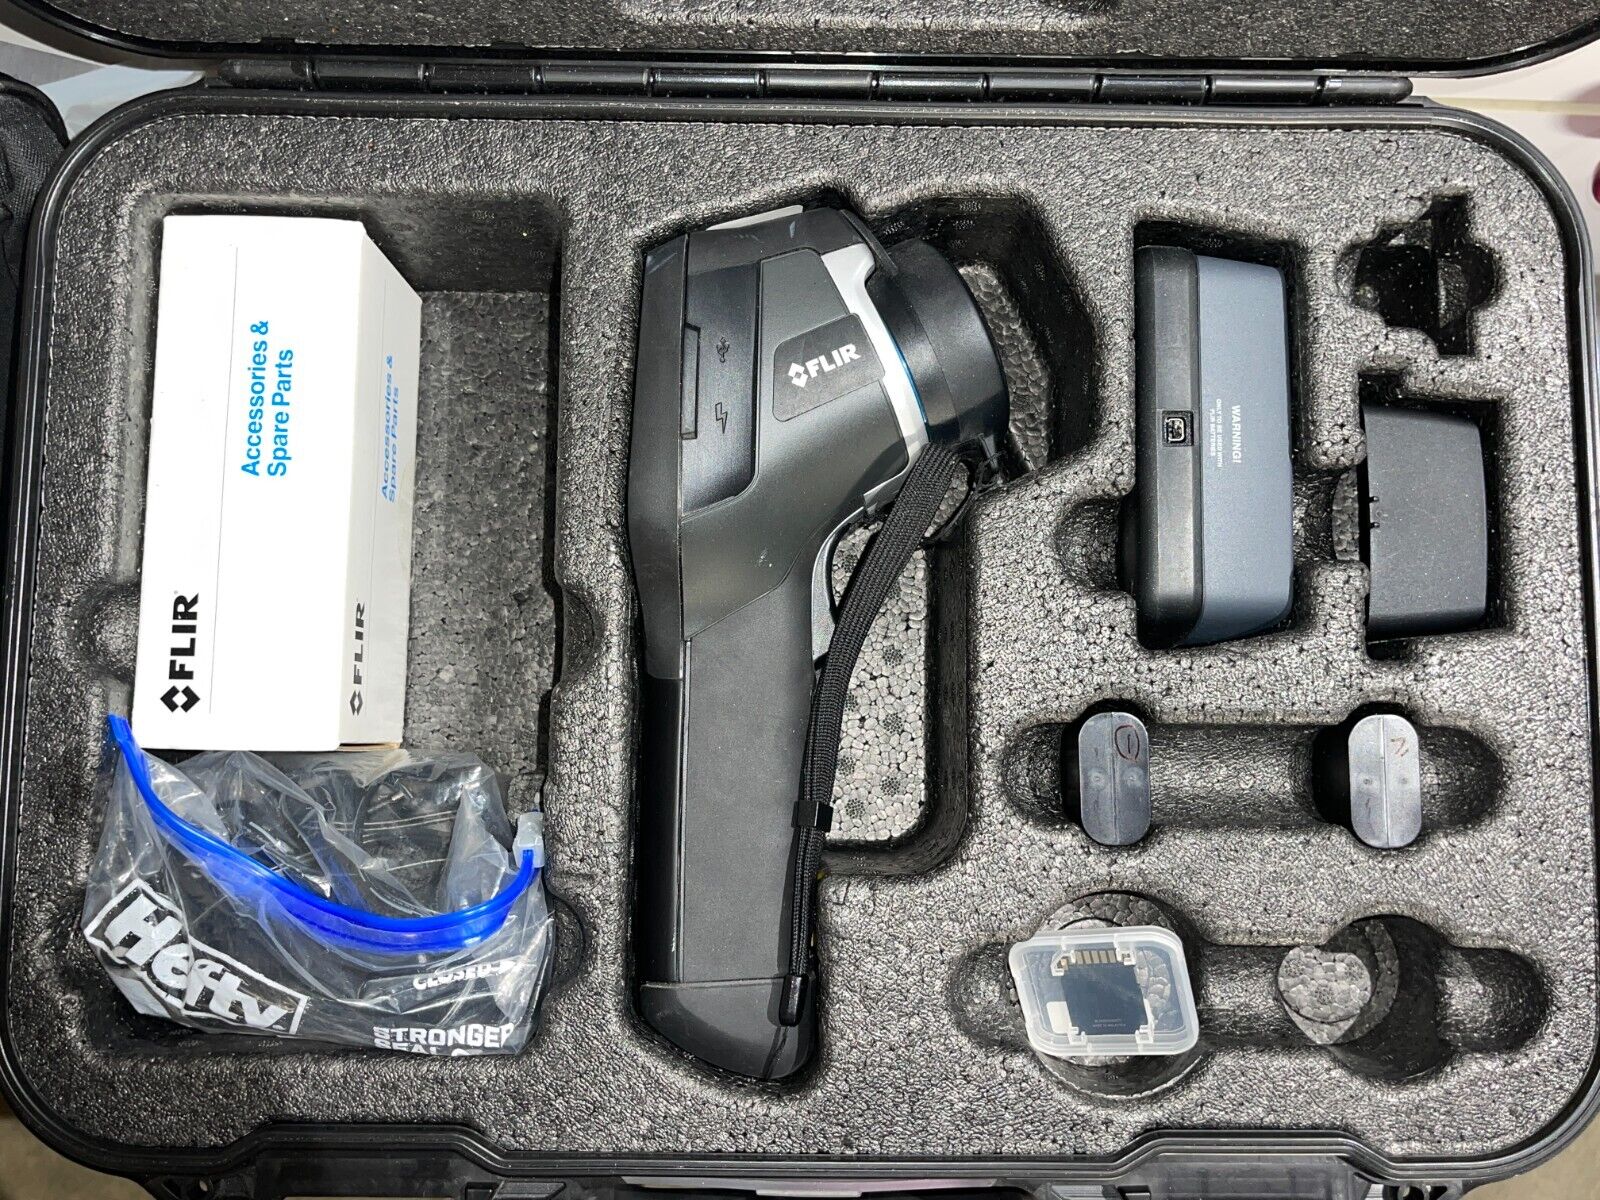 FLIR E60 Infrared Camera, Carrying Case, Sun Shield and 2 Batteries Included